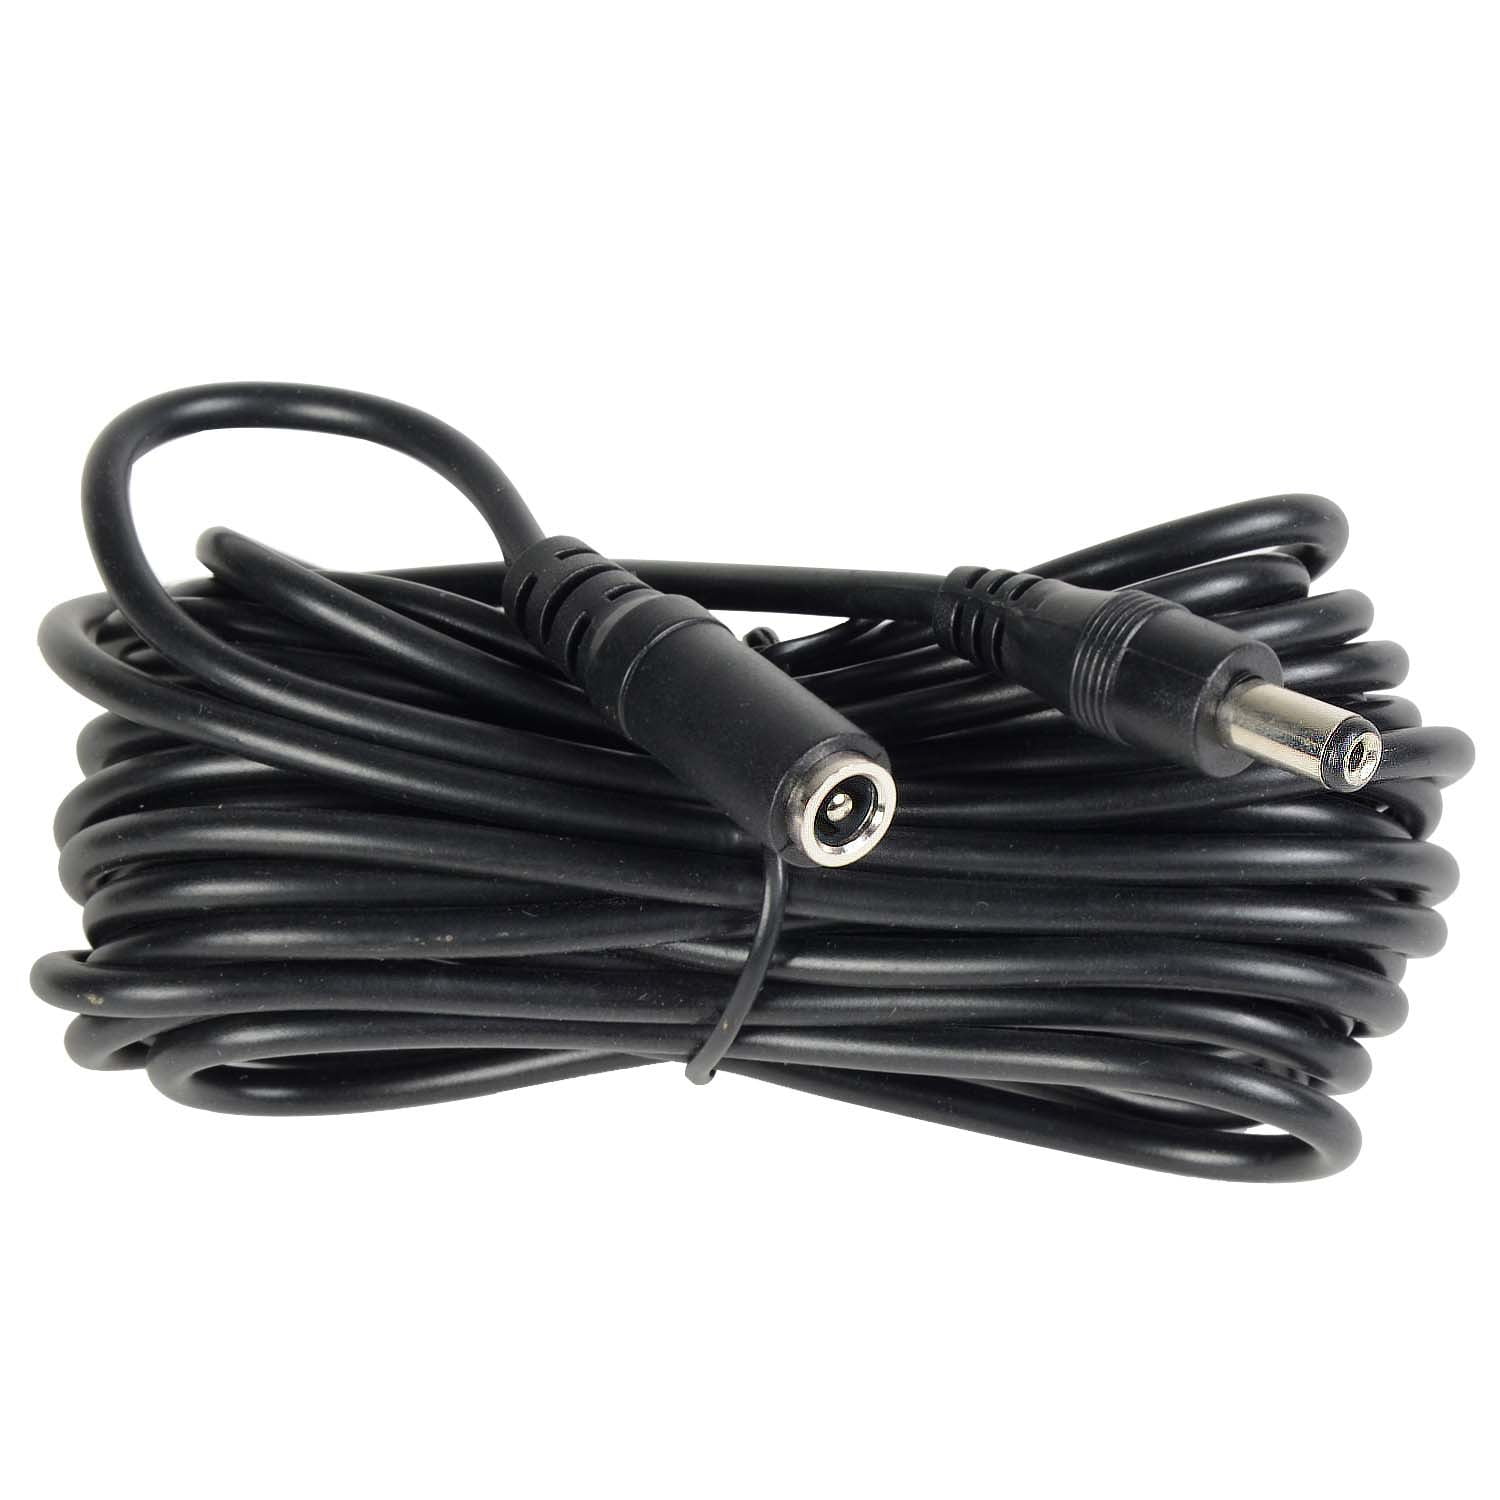 5M DC 12V 2.1mm x 5.5mm Extension Power Cable Adapter For CCTV Security Camera